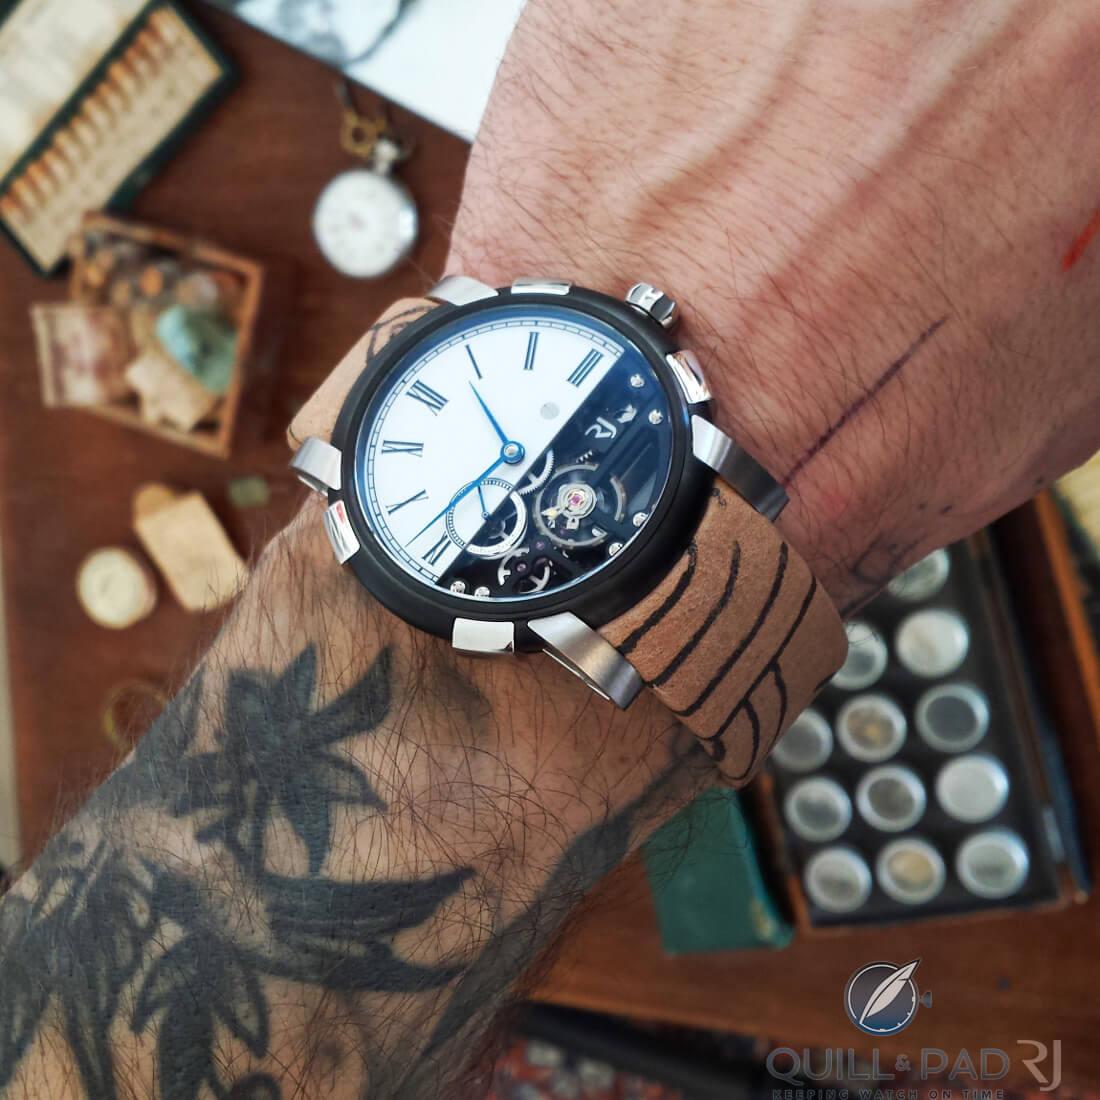 Romain Jerome Tattoo-DNA by Xoil on the wrist